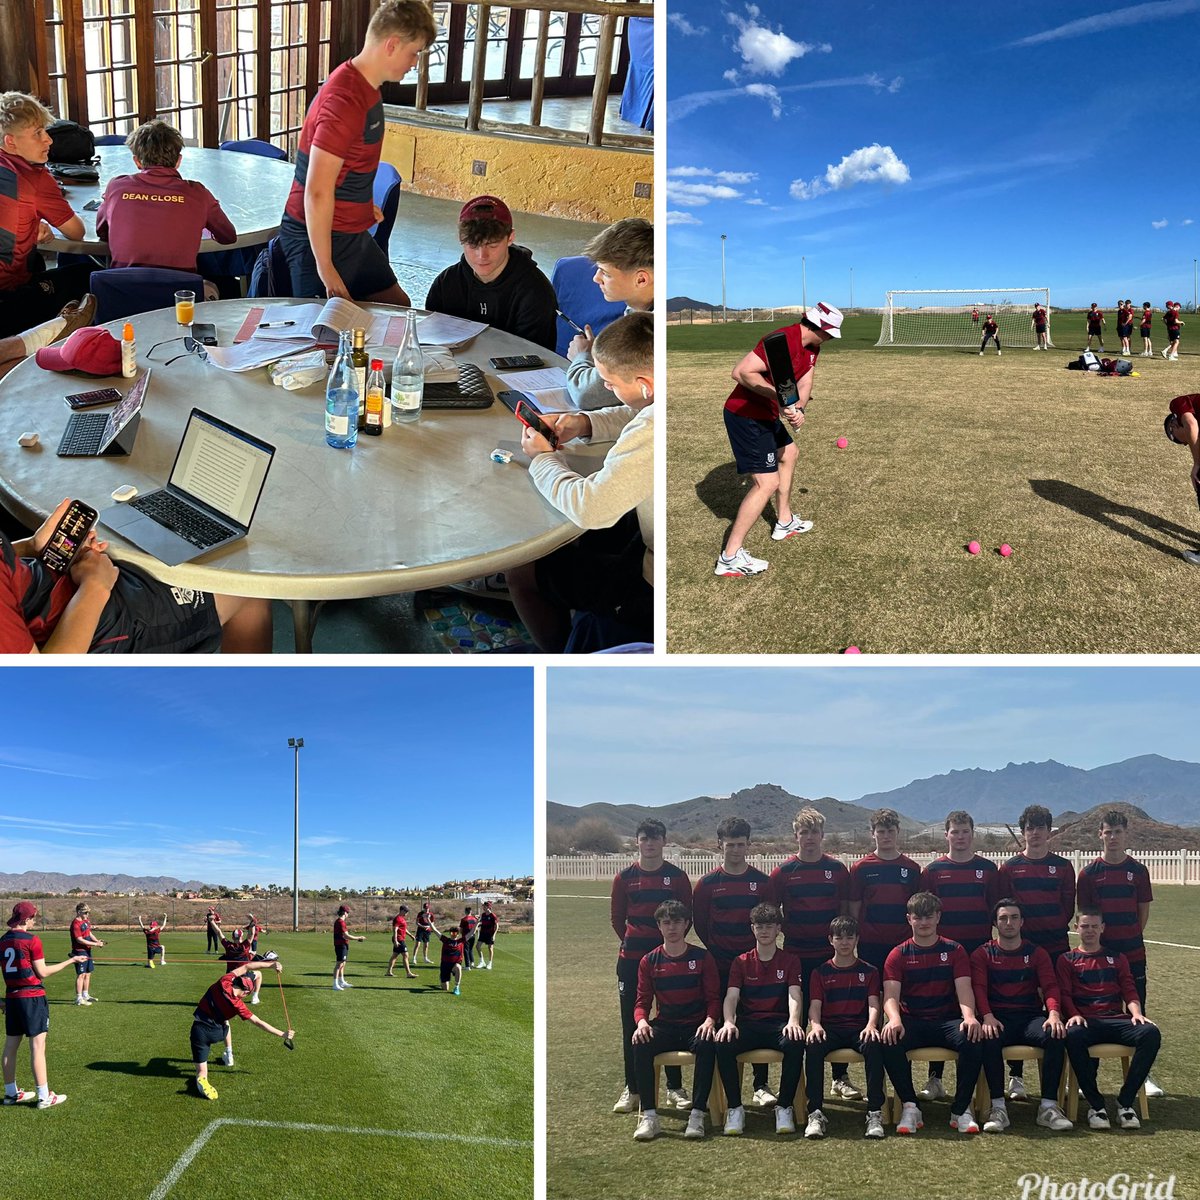 A great week at @DesertSpringsES for @TheCricketer100 for @DeanCloseSchool Fantastic preparation for returning back to school and the new cricket season